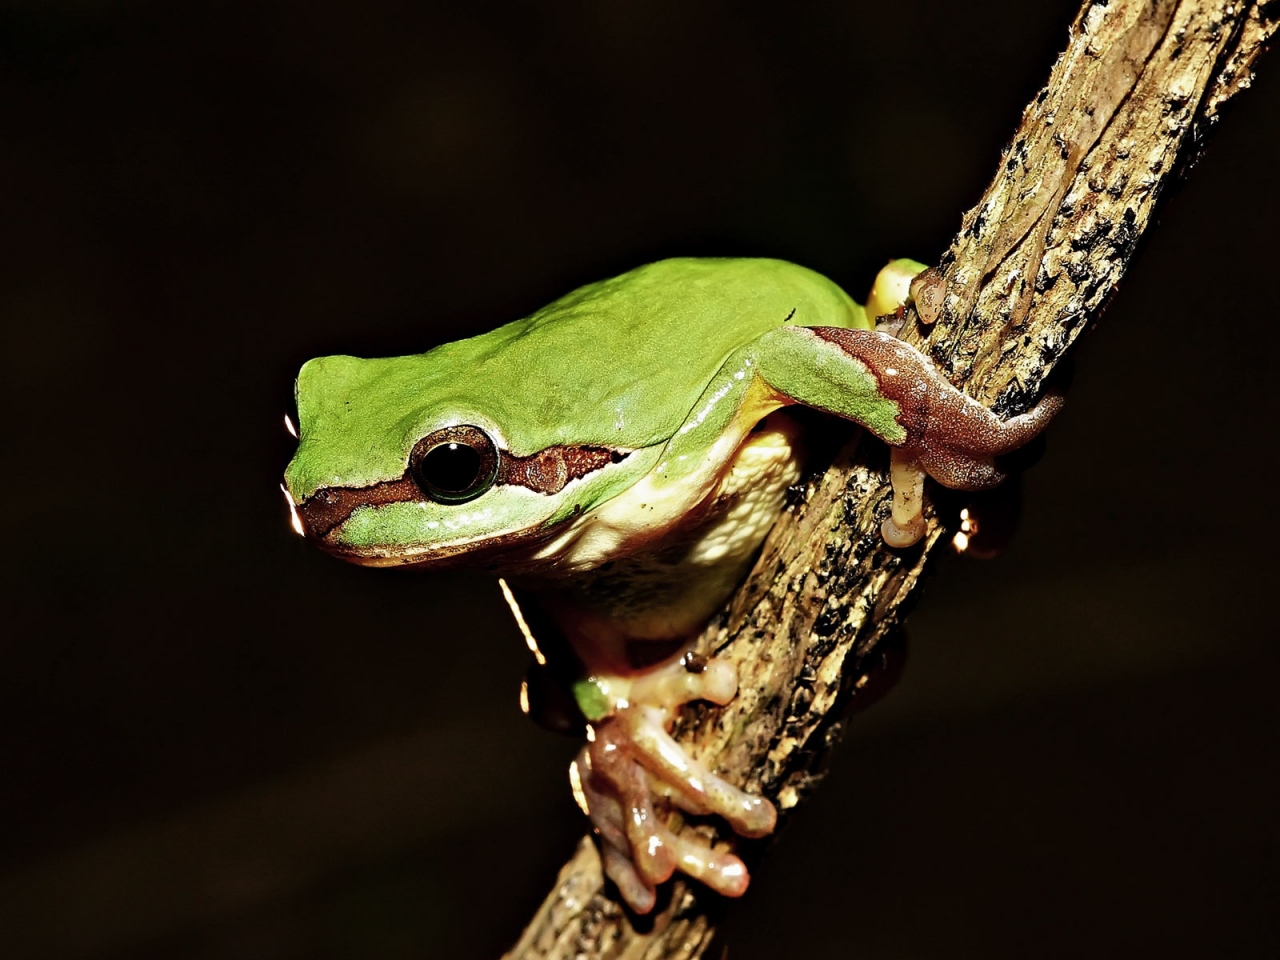 Frog on Tree for 1280 x 960 resolution